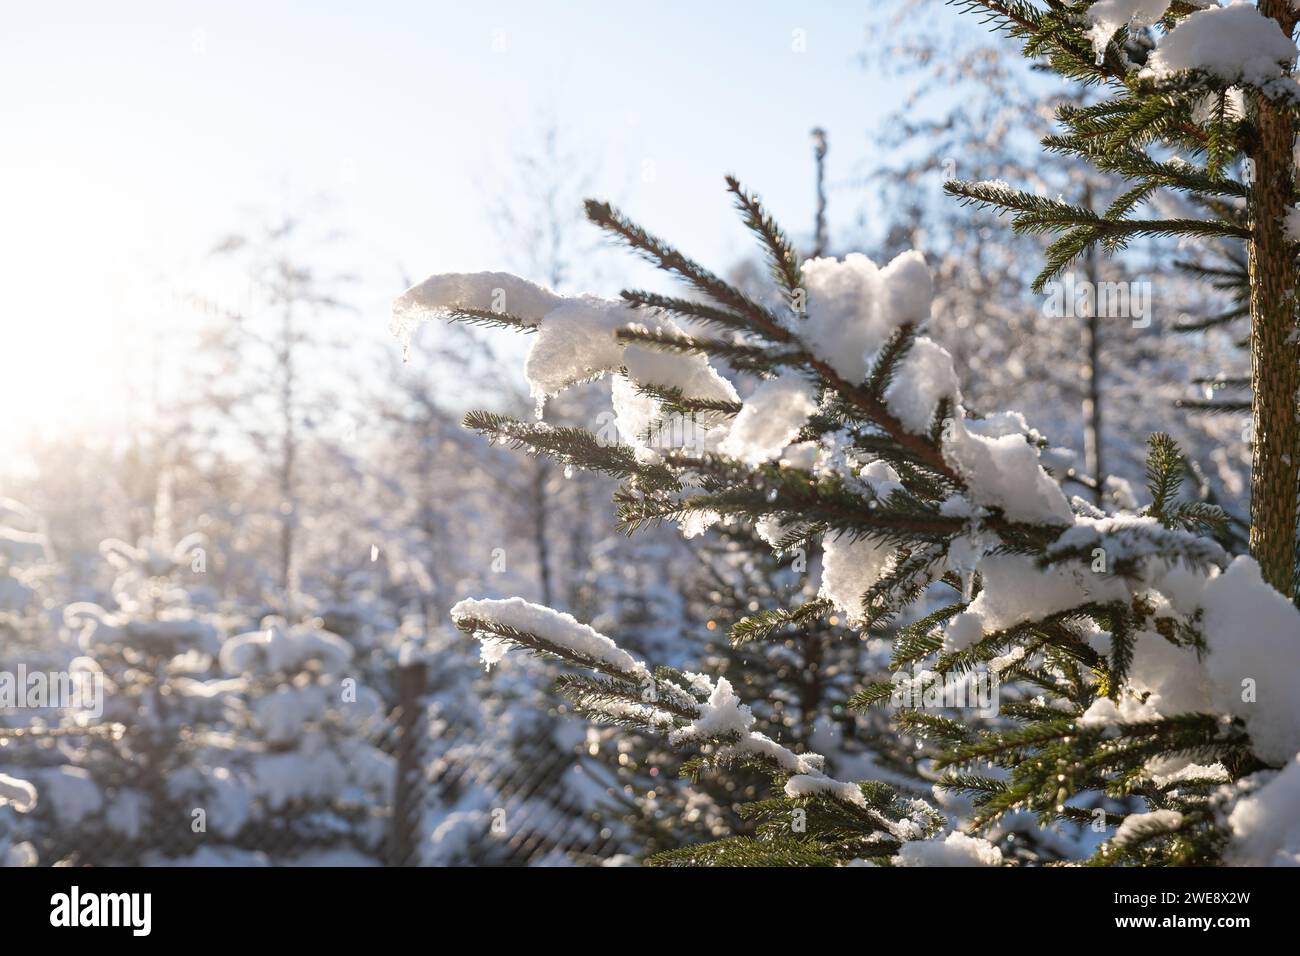 Pine tree or Christmas tree branches covered in melting snow, against setting sunlight. Close up shot, no people. Stock Photo